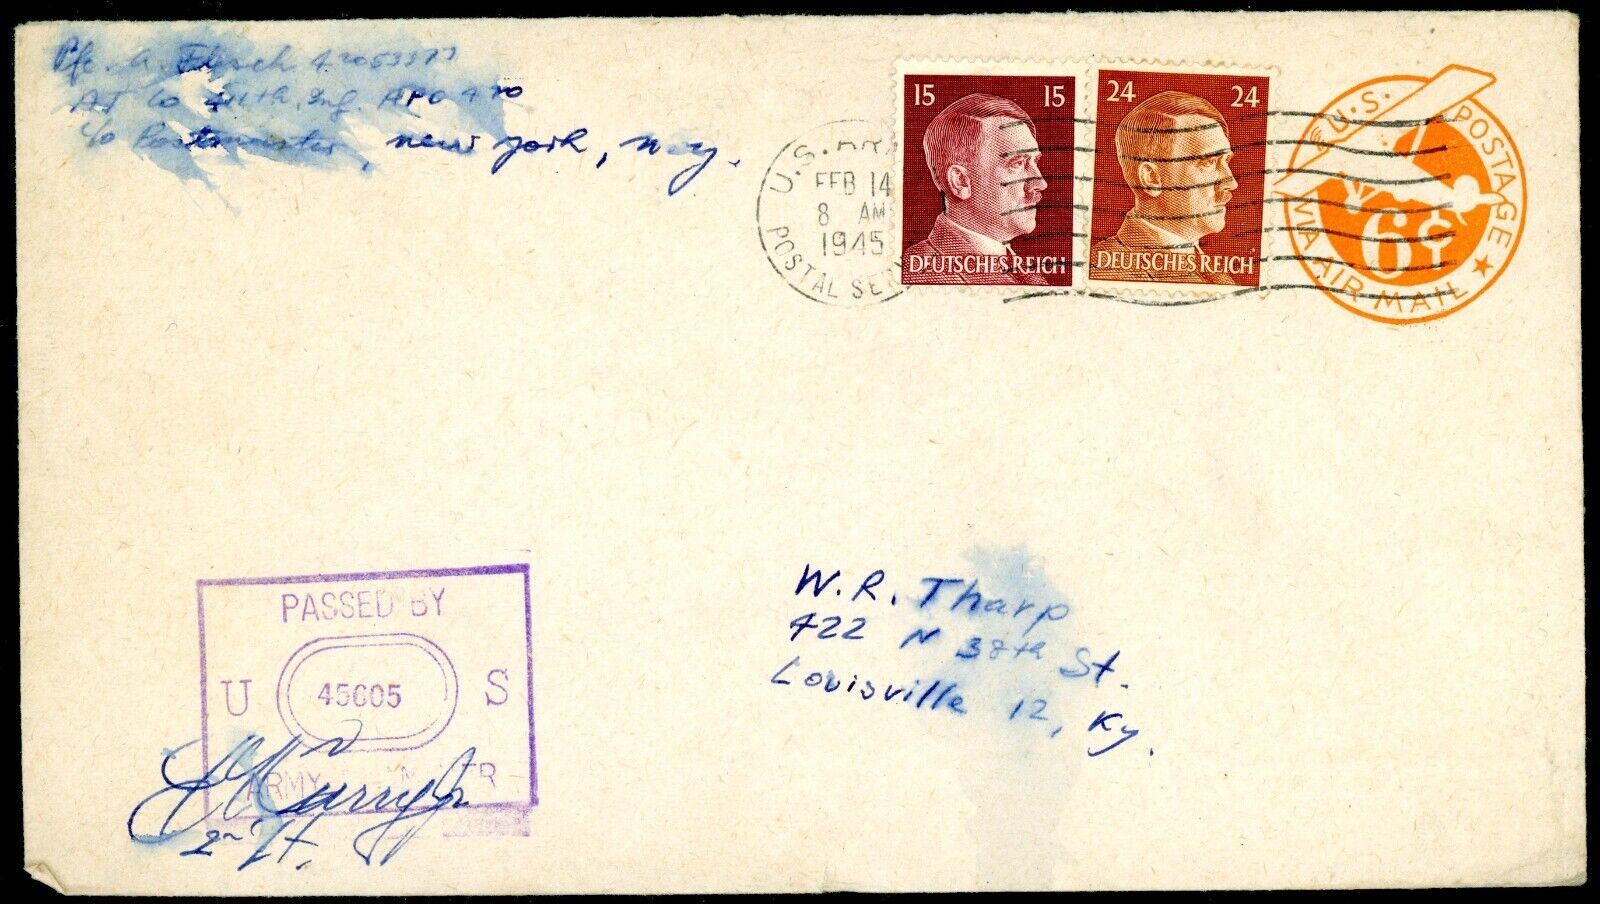 UNUSUAL 1945 US ARMY POSTAL SERVICE CANCEL ON 2 WWII GERMAN STAMPS CENSORED APO